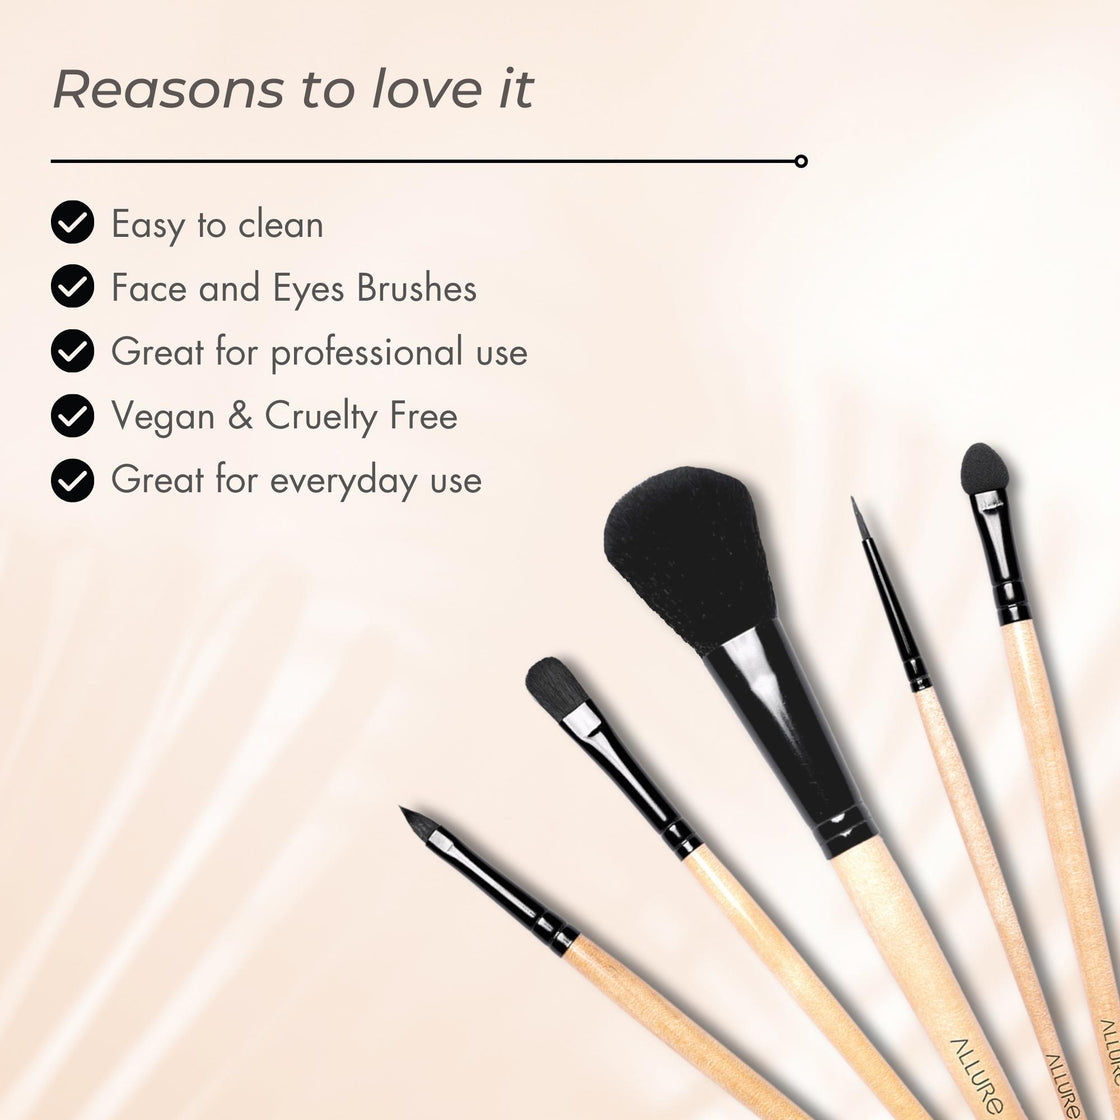 Allure Classic Makeup Brushes Pack Of 5 ( ACK-05 )